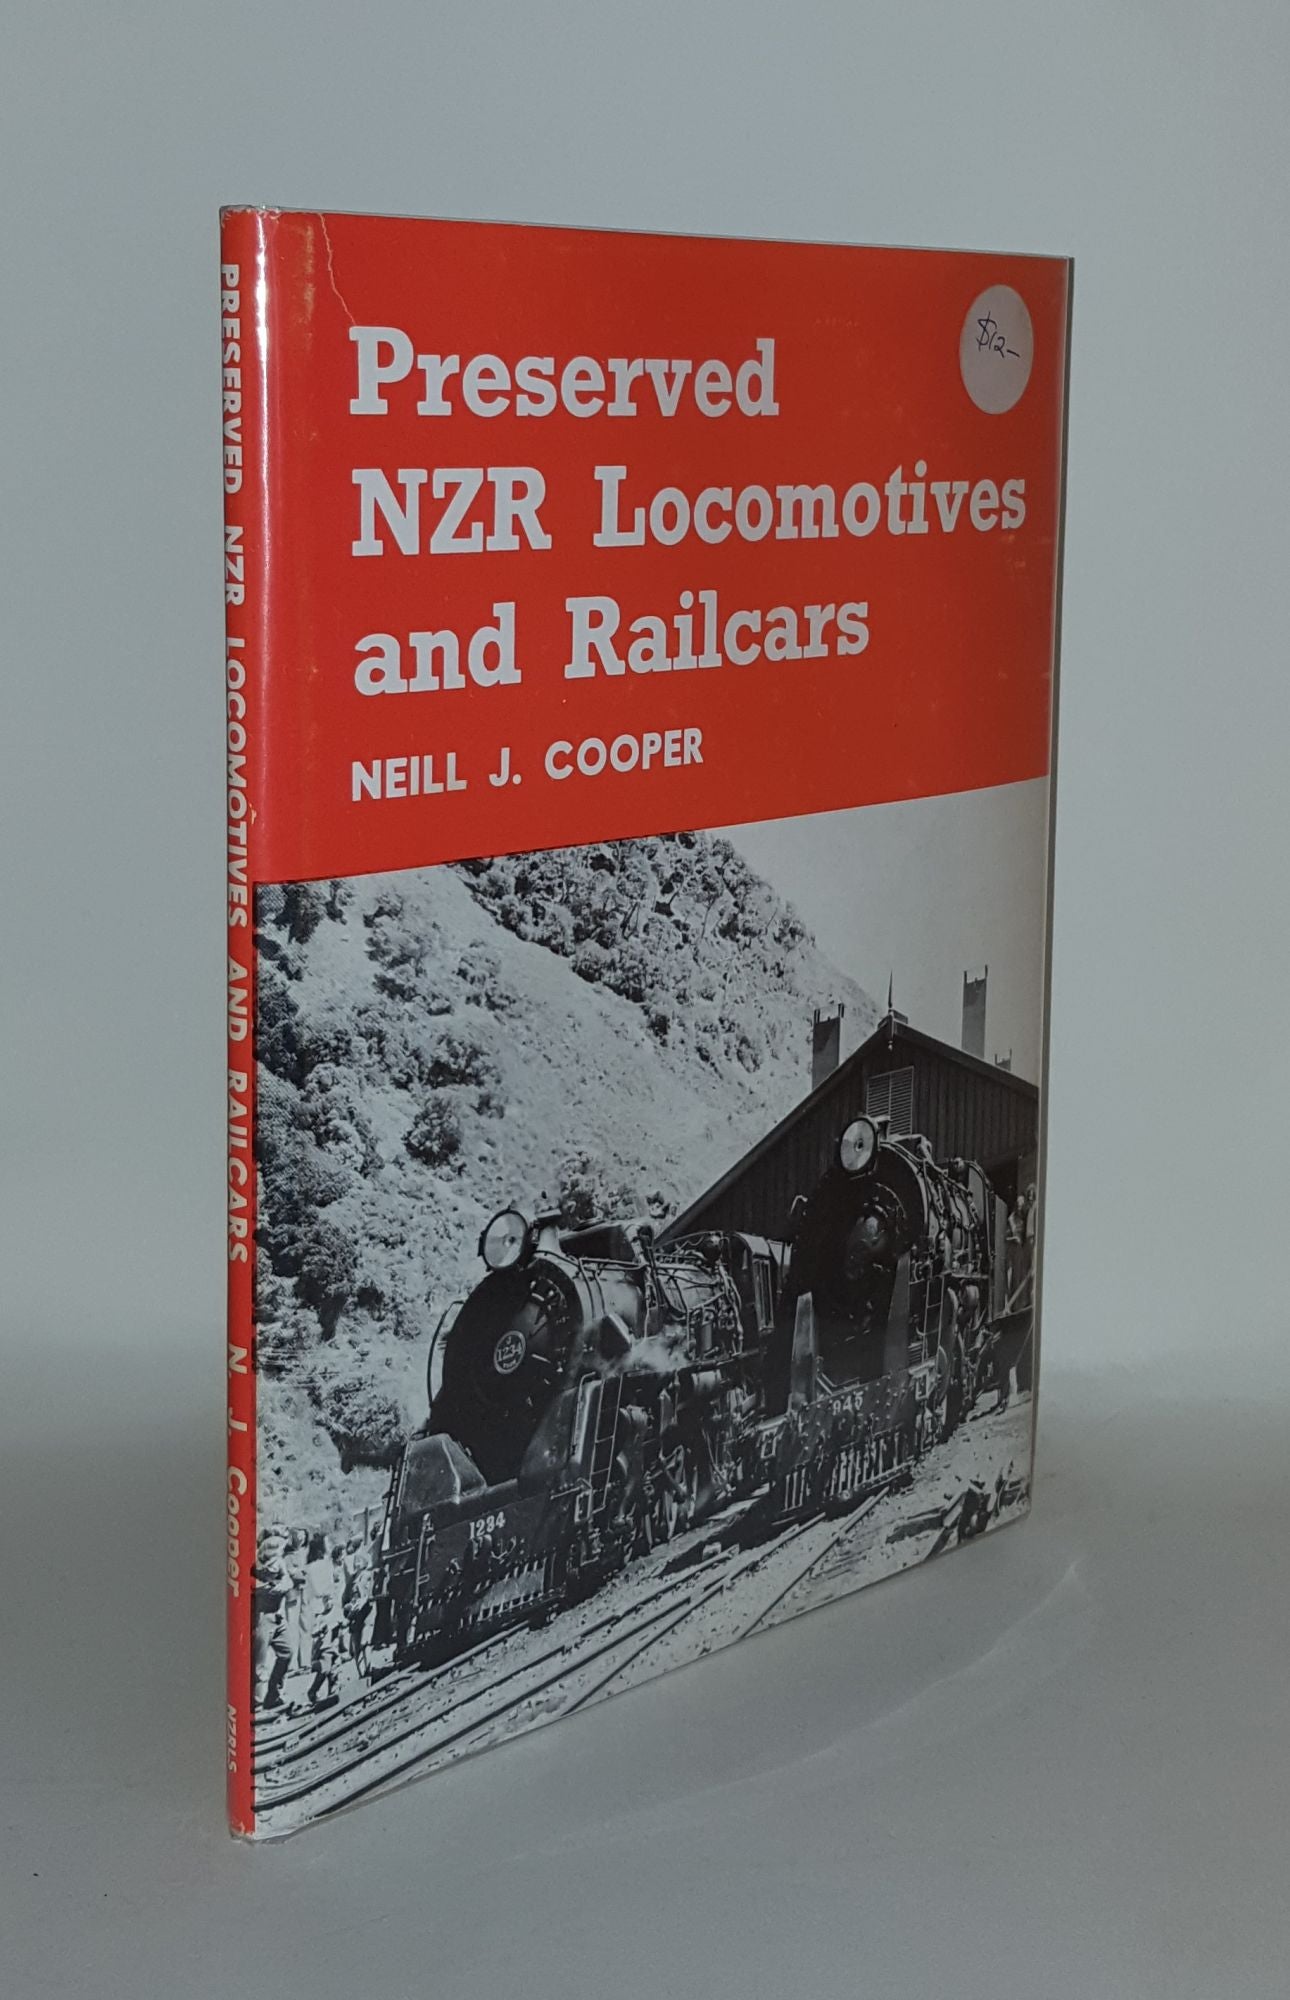 COOPER Neill J. - Preserved Nzr Locomotives and Railcars